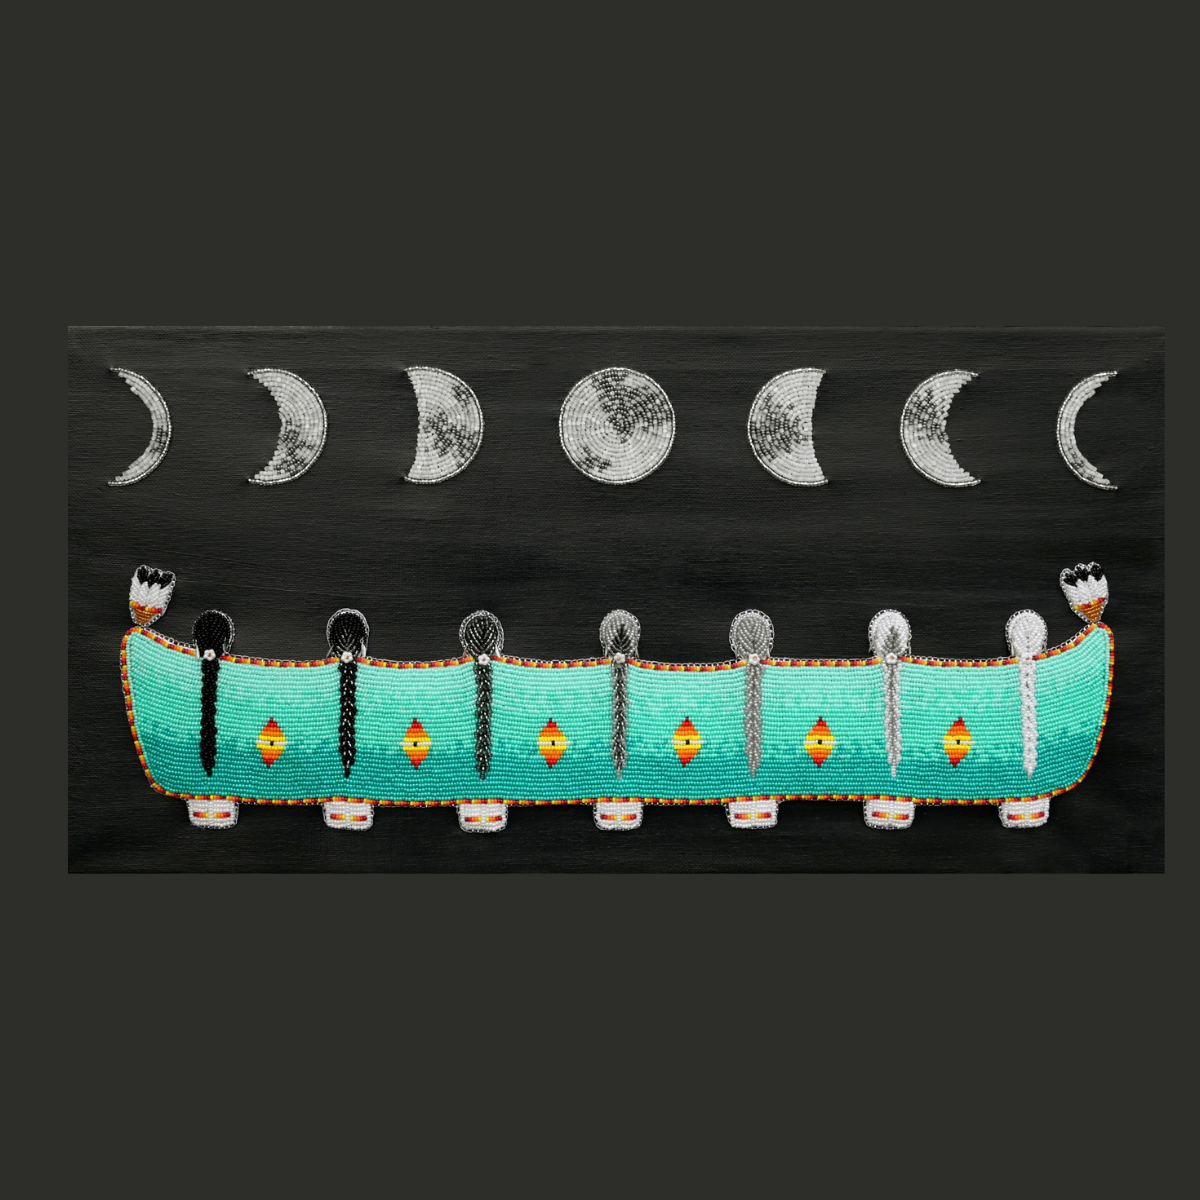 At first glance, a turquoise canoe with the back of heads showing braided hair showing 7 women from dark to white hair, representing all stages of life. On top of the turquoise shawl, a moon crescent, up to a full moon in the middle of the canvas, then ending with a crescent. The turquoise shawl is held by eagle feathers at each of the two ends.